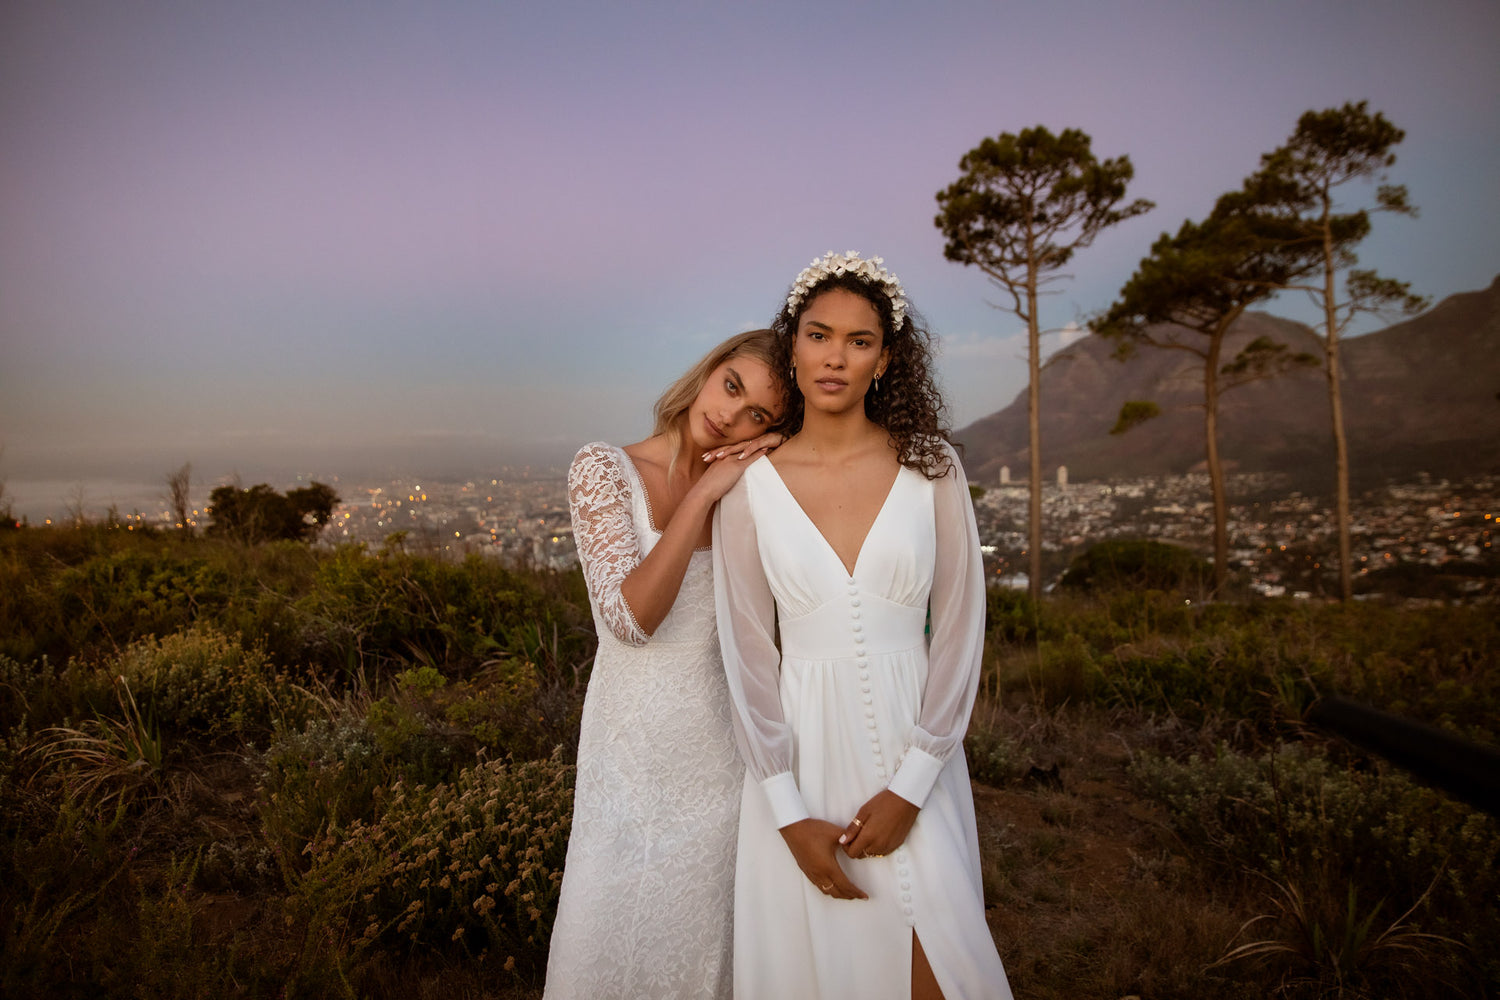 Two women surrounded by greenery and hills above the city as the sun goes down. One woman has blonde hair and is wearing a modern, long floral, three quarter sleeve dress she is resting her head and hands on the left shoulder of the other woman. The other woman has brown curly hair and is wearing a floral head piece. Her dress is long, with a deep V neck, long sheer see though sleeves and buttoned at the front..